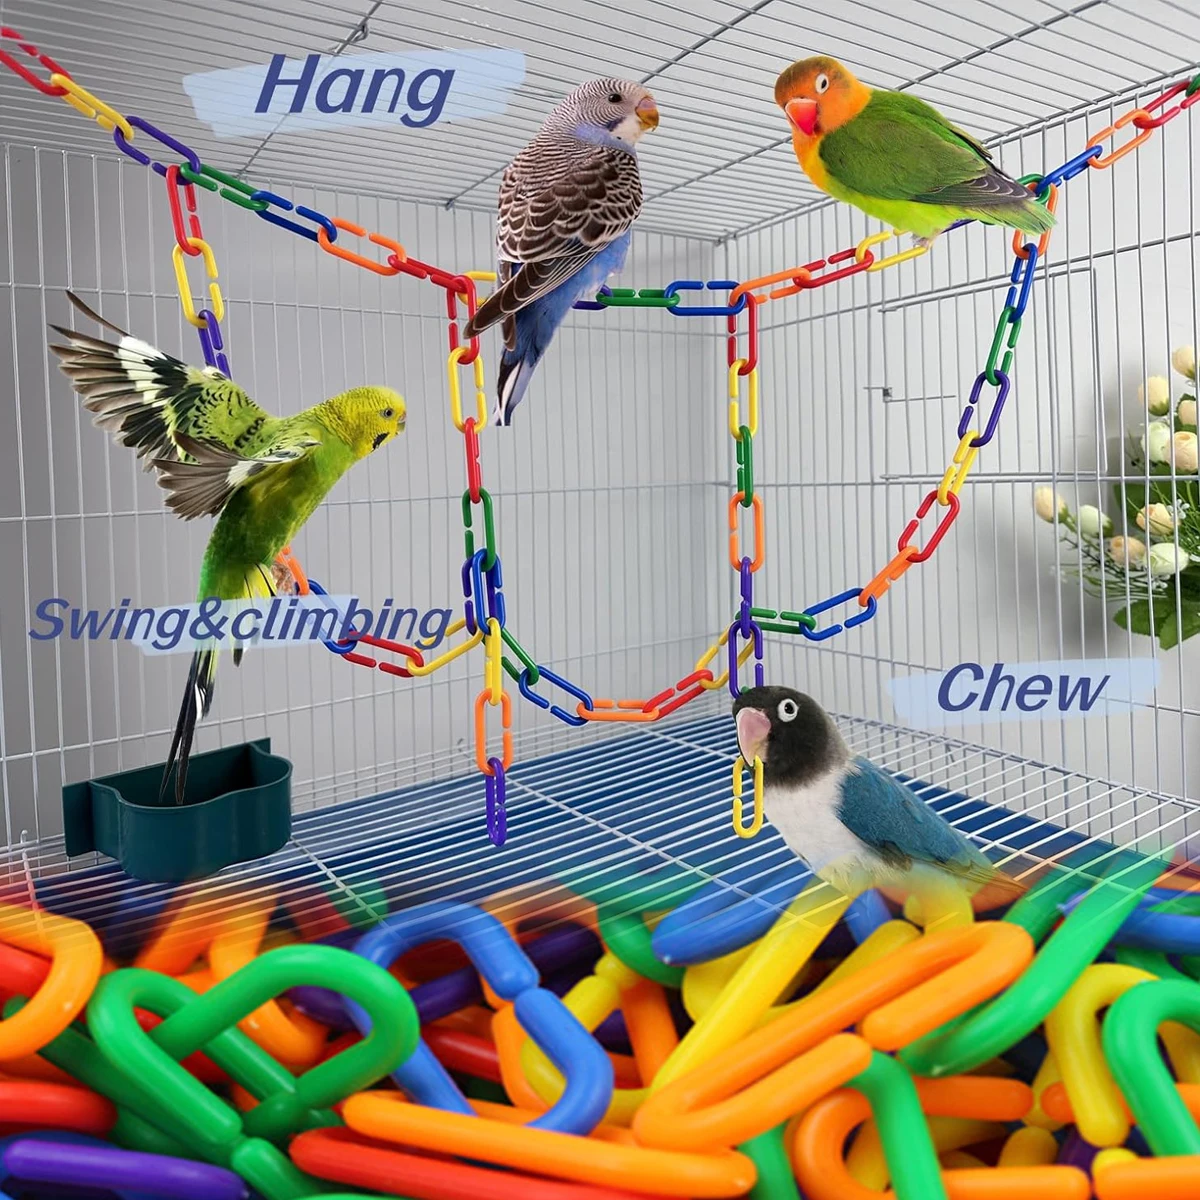 100pcs/Set Parrot Chewing Plastic Toys Rainbow C-Clips Chains Hooks Plastic Chain Rat Parrot Bird Cage Swing Climbing Cage Toys